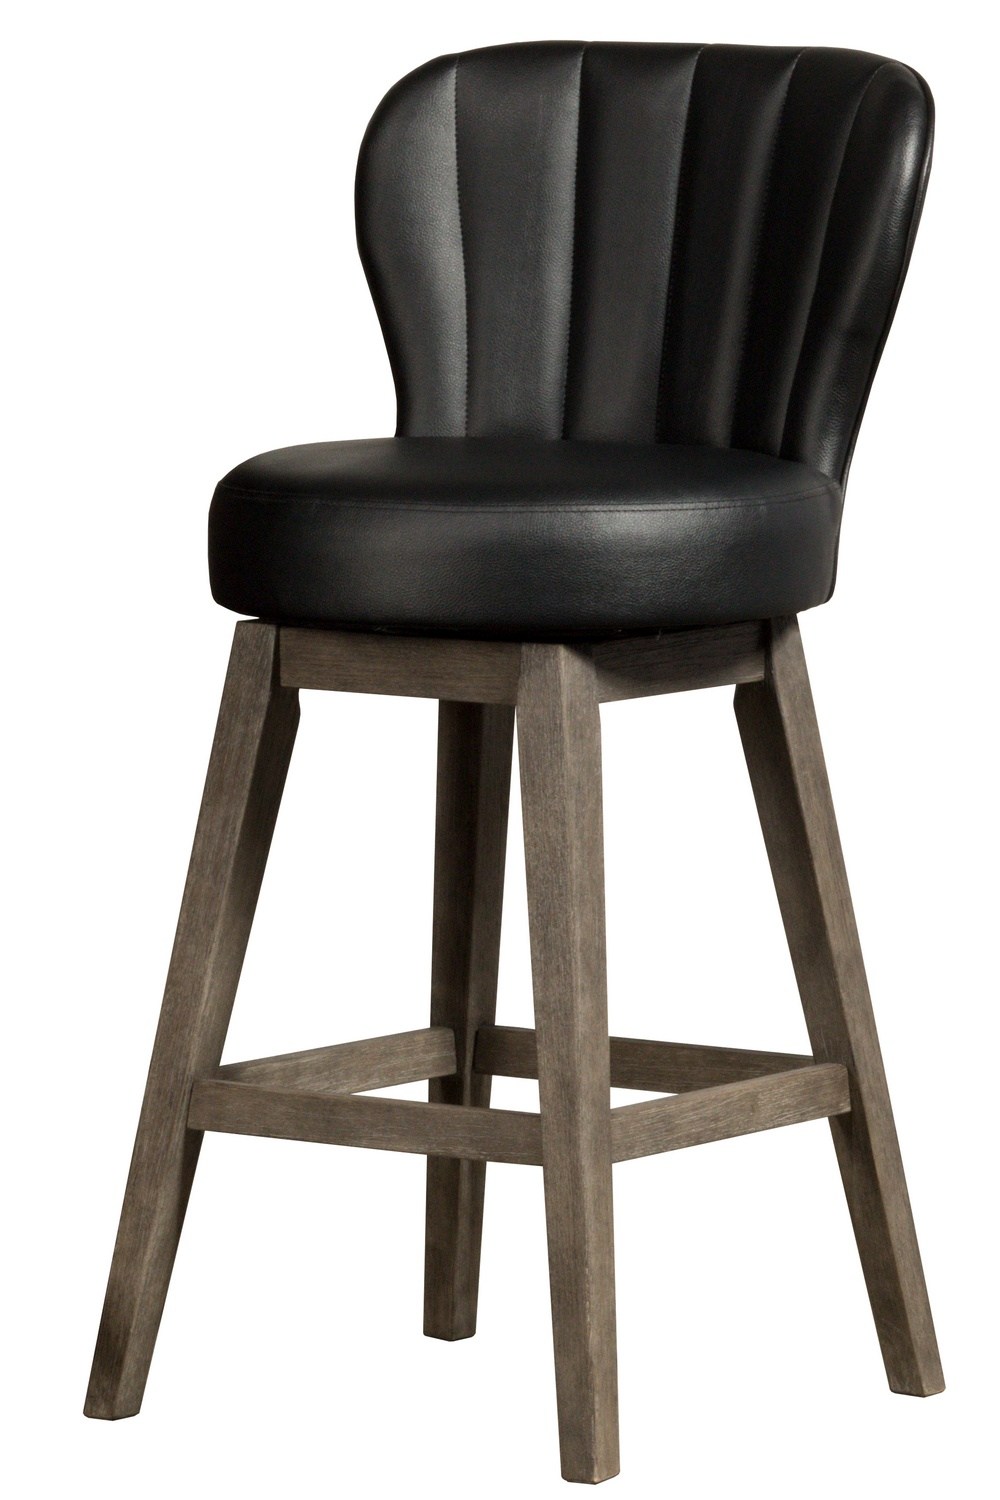 Hillsdale Bandera Wood Counter Height Swivel Stool - Brushed Charcoal